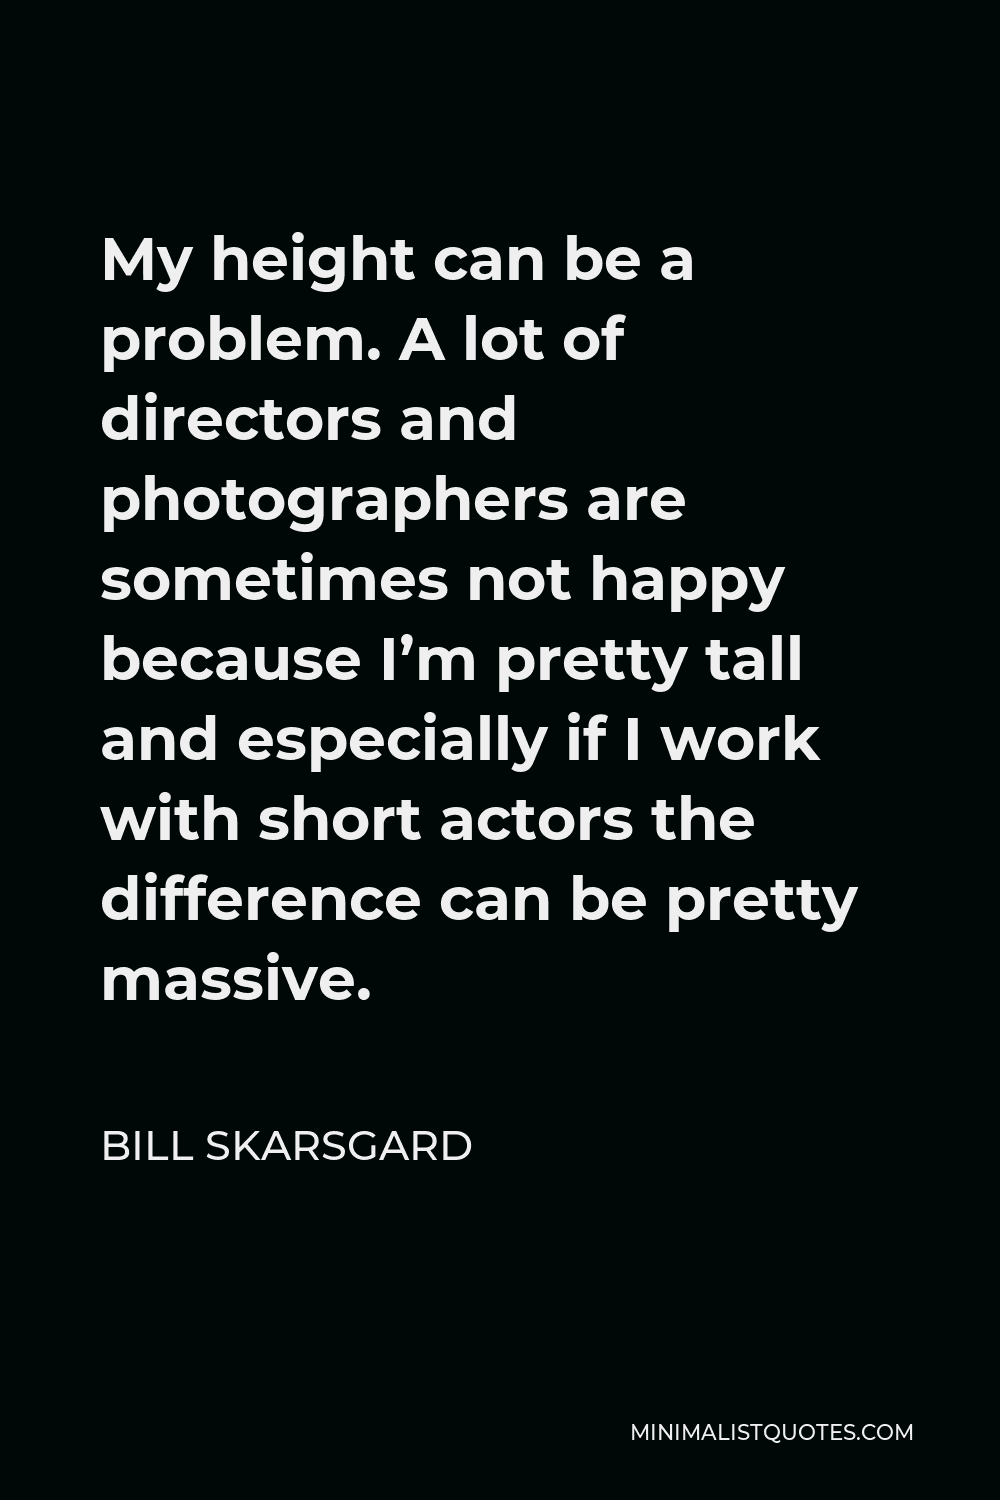 Bill Skarsgard Quote - My height can be a problem. A lot of directors and photographers are sometimes not happy because I’m pretty tall and especially if I work with short actors the difference can be pretty massive.